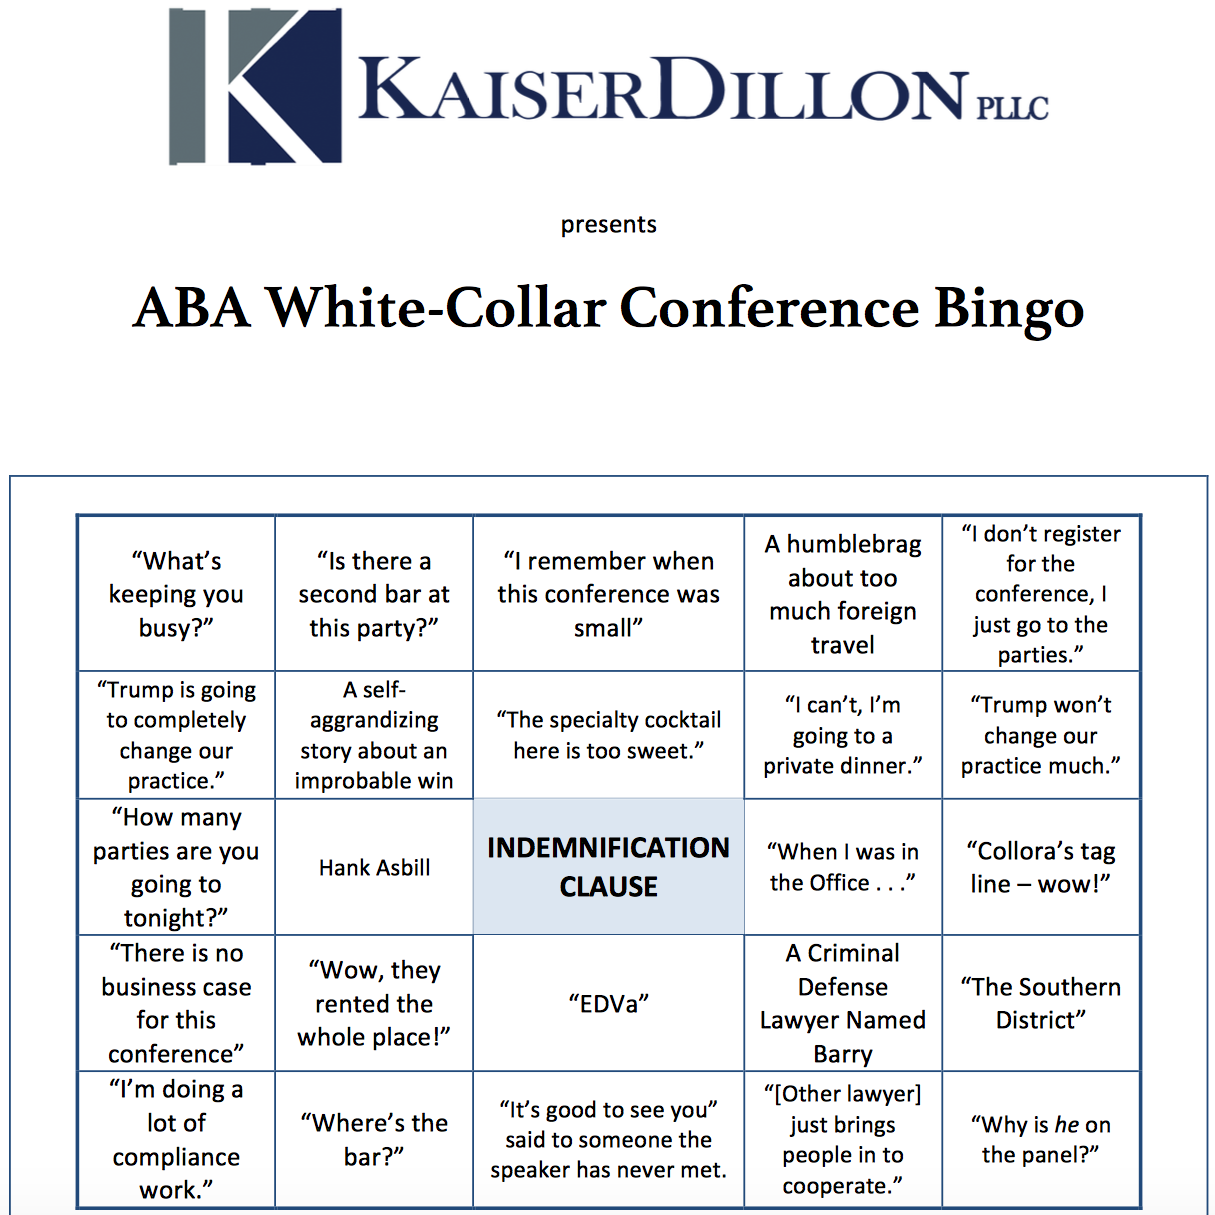 Kaiser's Guide to the ABA WhiteCollar Conference Page 2 of 2 Above